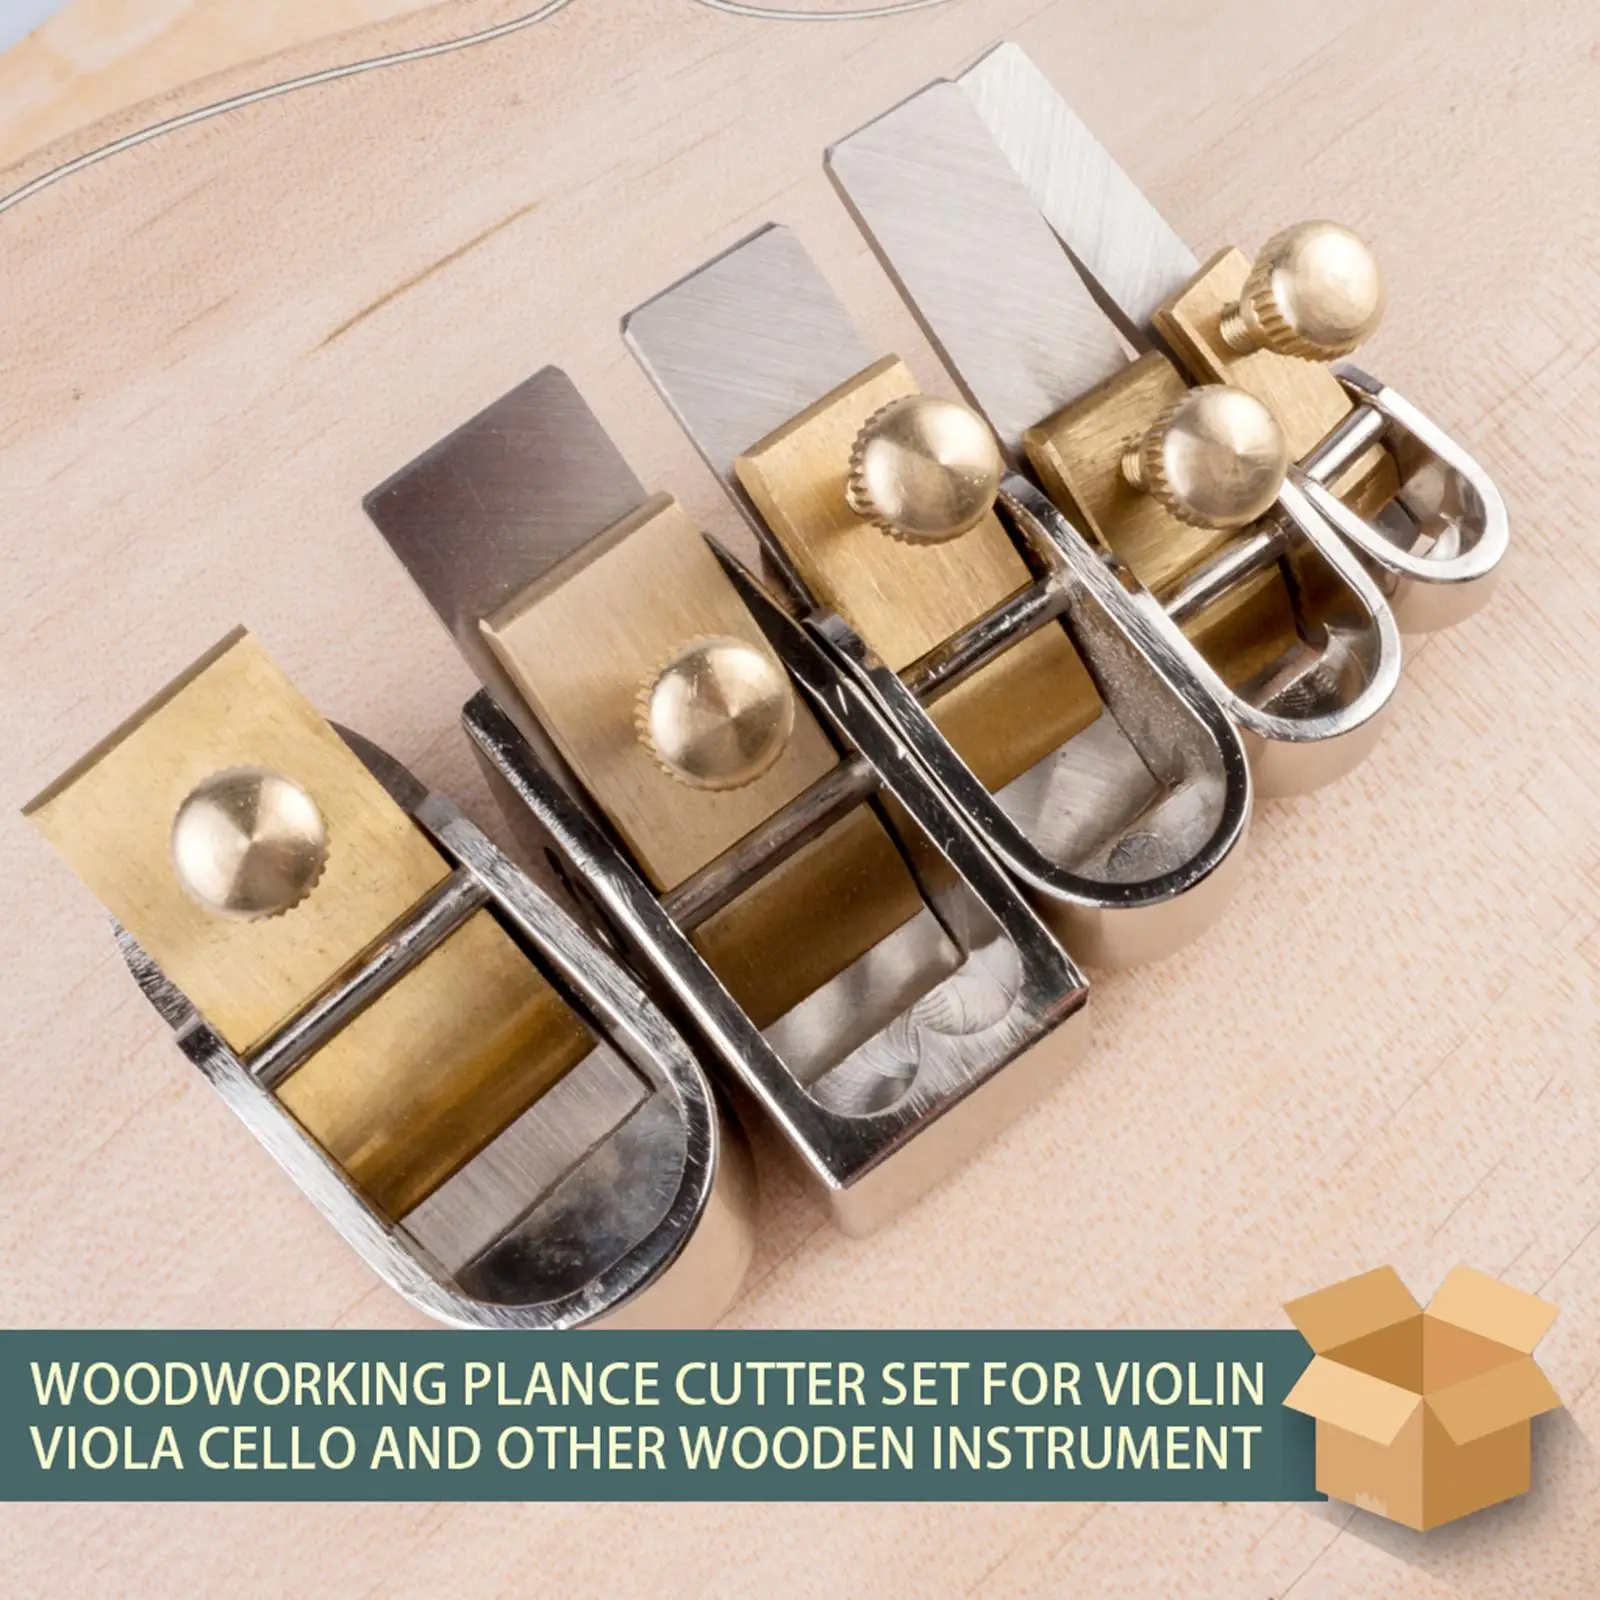 Professional Violin Thumb Planer Music Instrument Accesssory Thumb Plane Finger Planer for Trimming Wooden Instrument